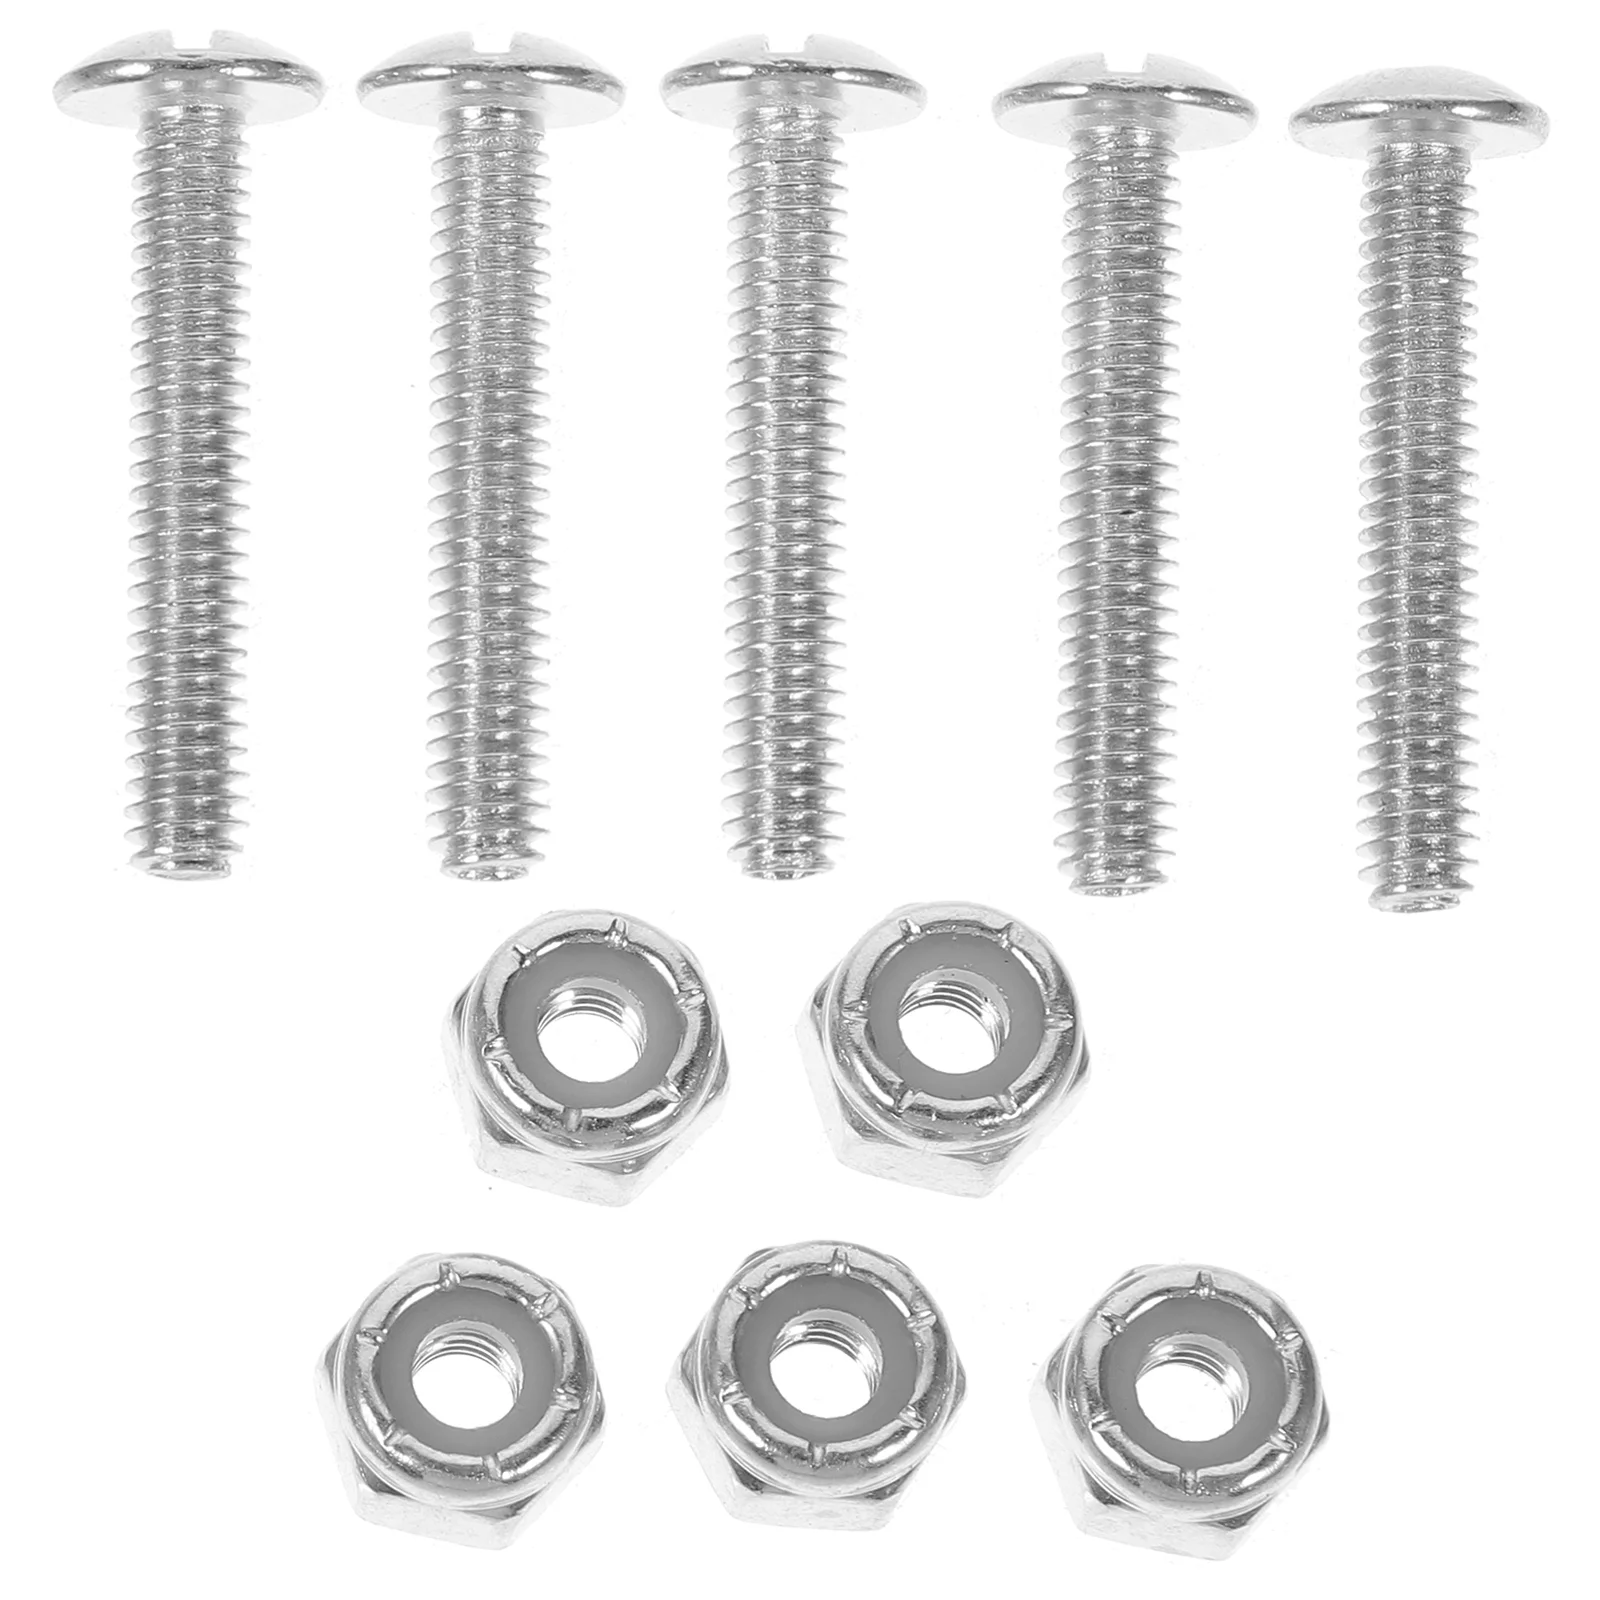 12 Pcs Table Football Screws Foosball Replacement Parts Nut Soccer Hardware Machine Nuts Galvanized Iron Accessories 12 pcs fastener foosball table screws table football screws foosball nut lightweight replacement parts nuts footballs